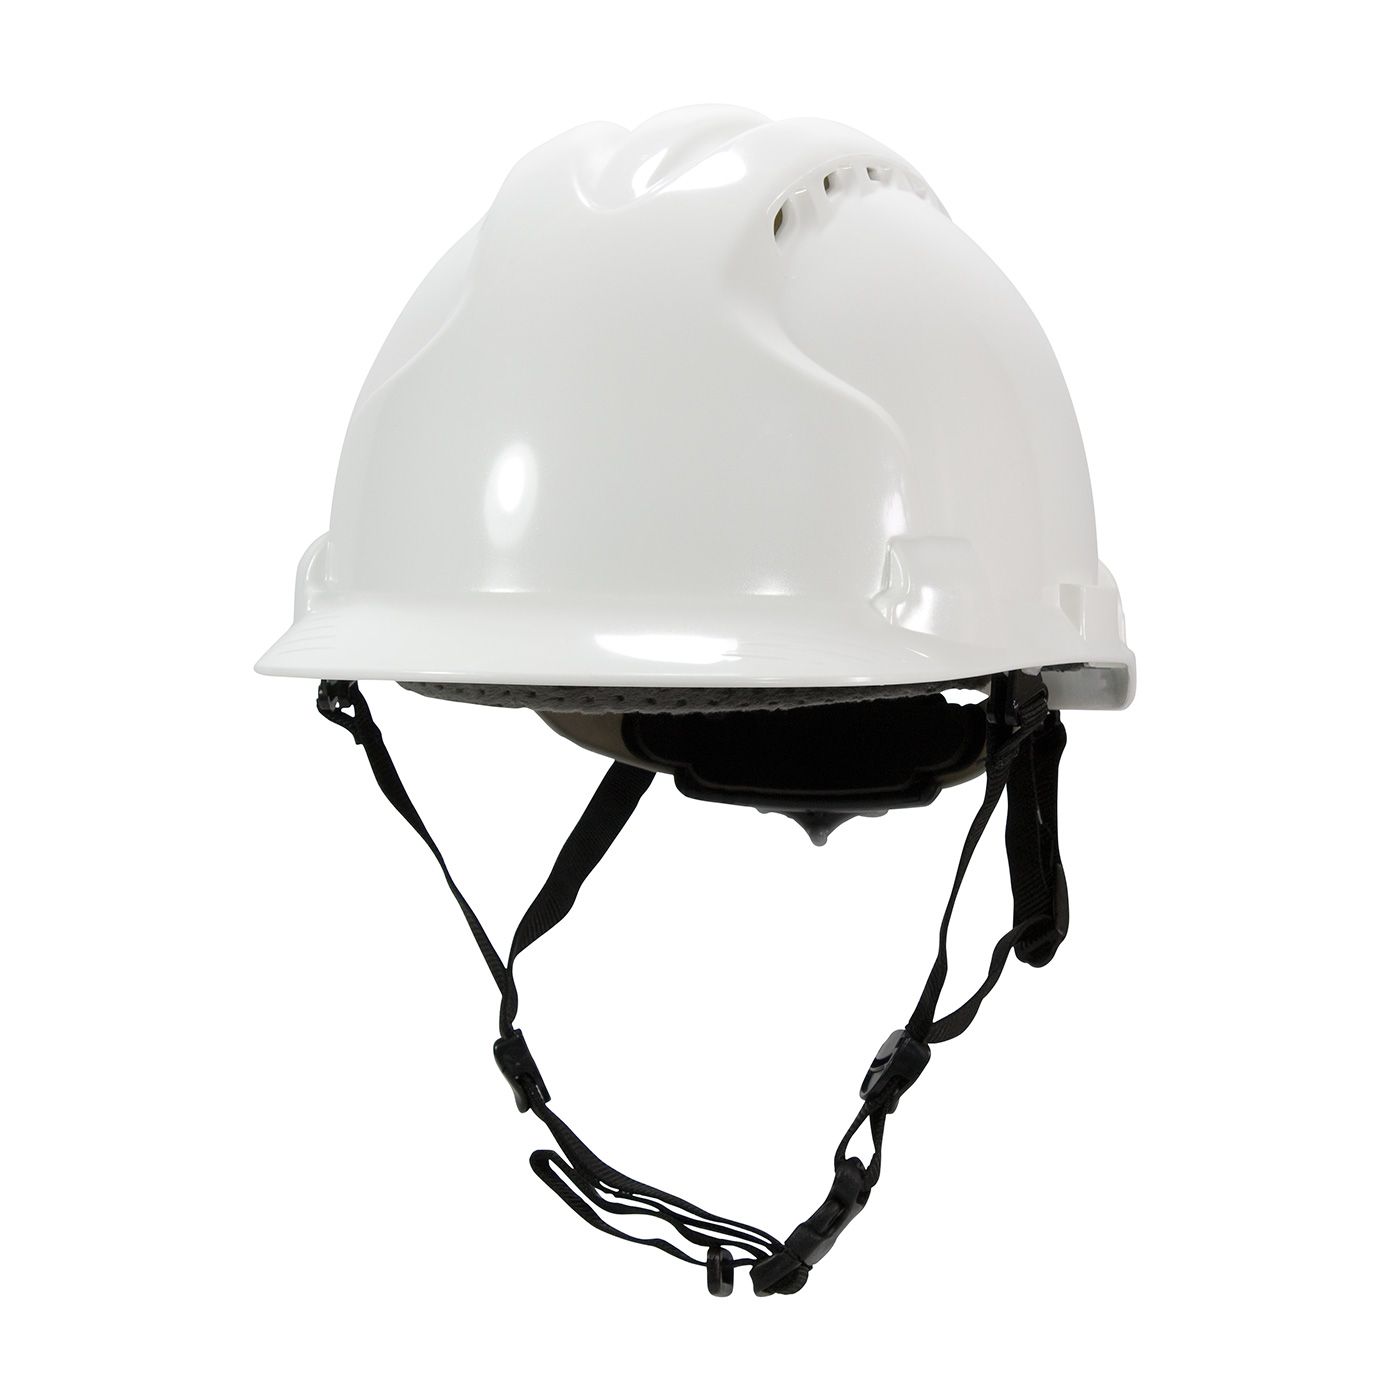 PIP® MK8 Evolution® 280-AHS240V-LY Vented, Type II Linesman Hard Hat with HDPE Shell, EPS Impact Liner, Polyester Suspension, Wheel Ratchet Adjustment and 4-Point Chin Strap, Neon Yellow